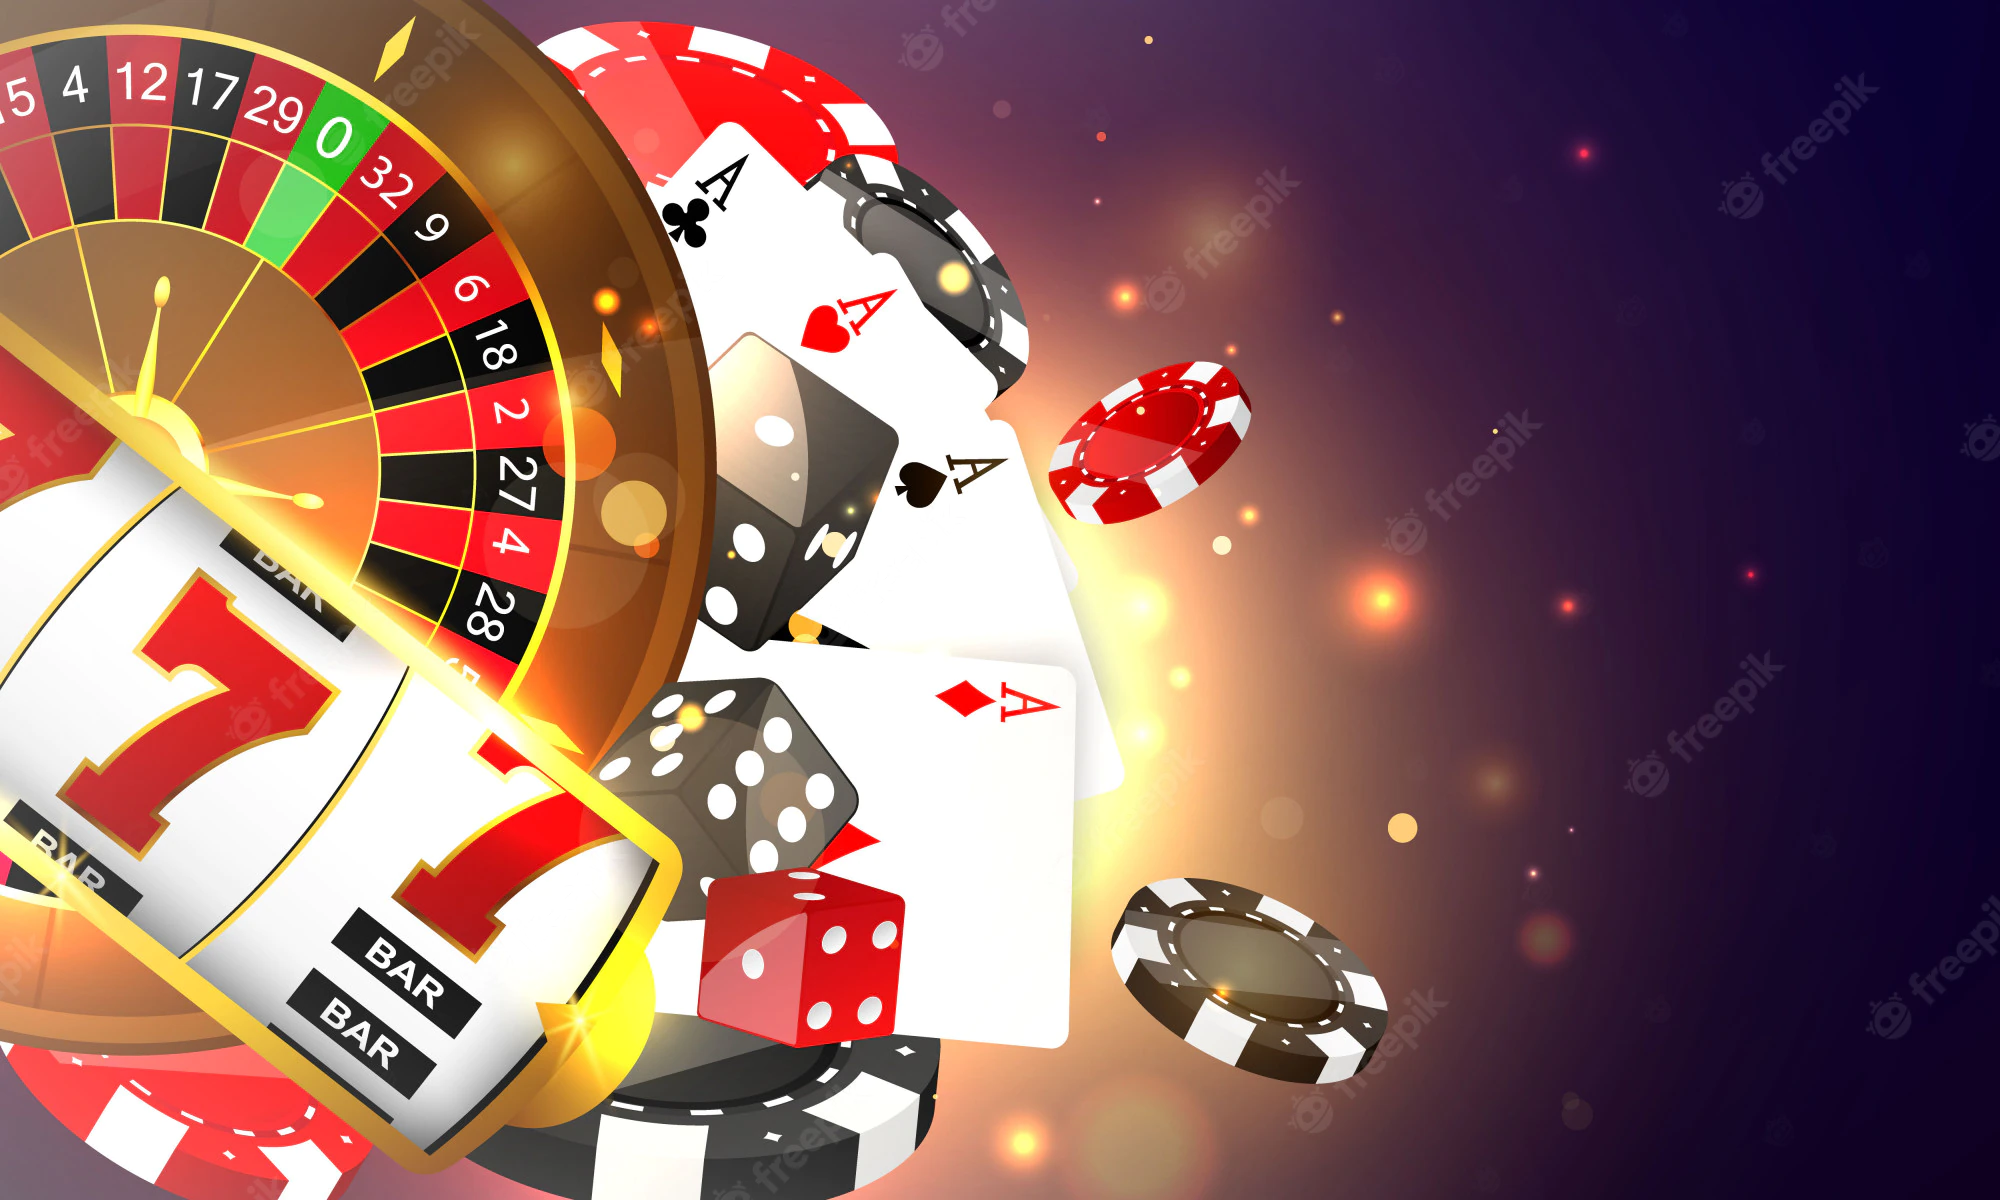 Tips for Finding Beatable Games at Online Casino